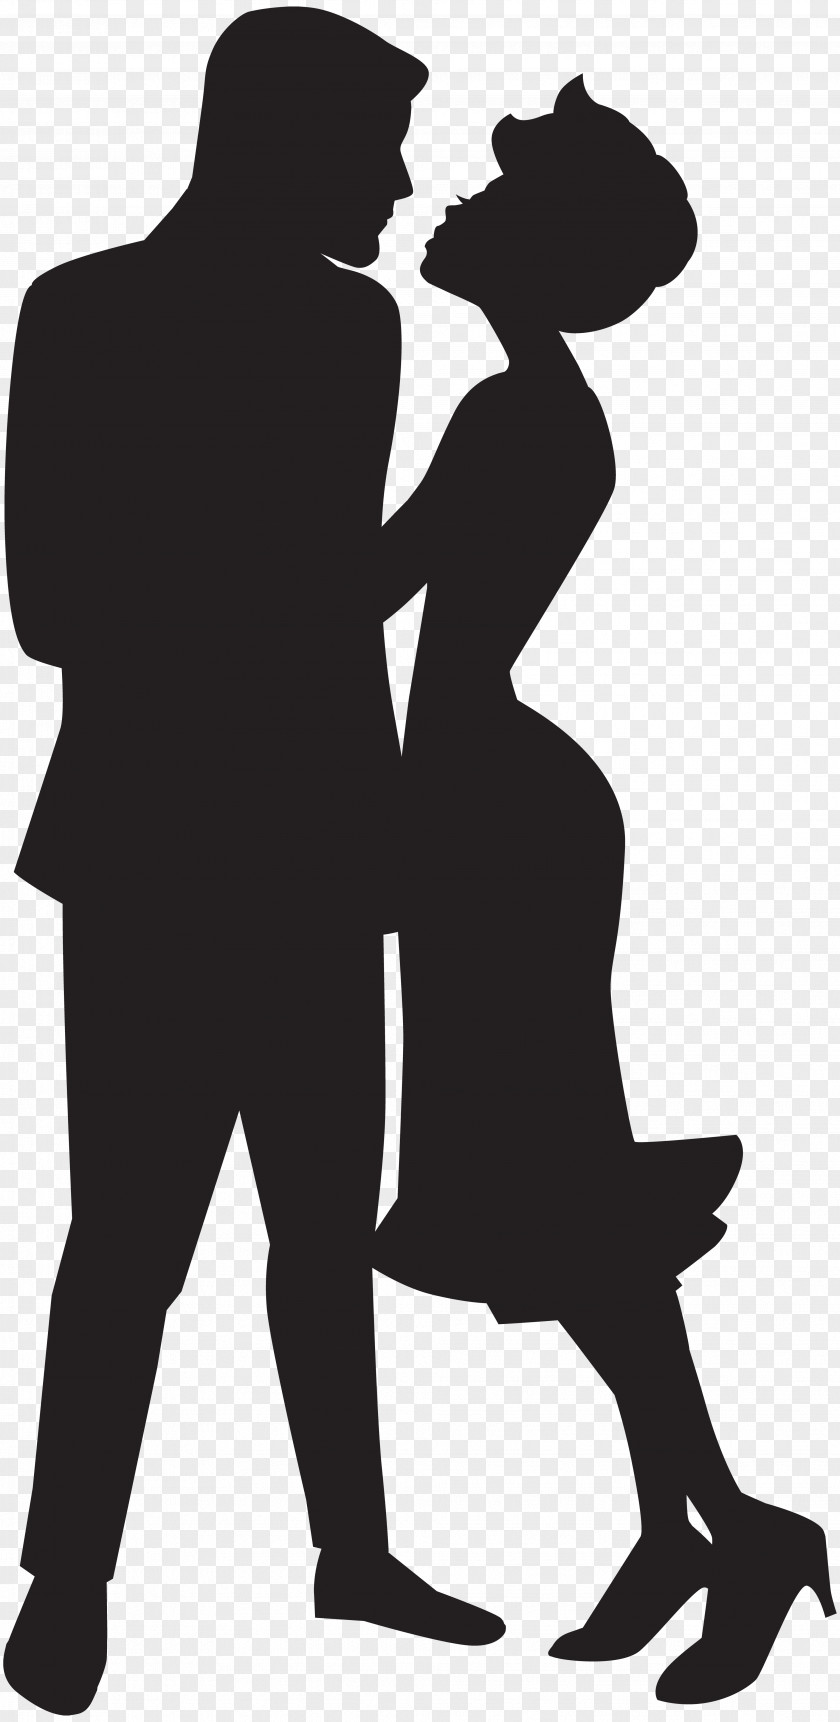 Couple In Love Silhouette Clip Art PNG